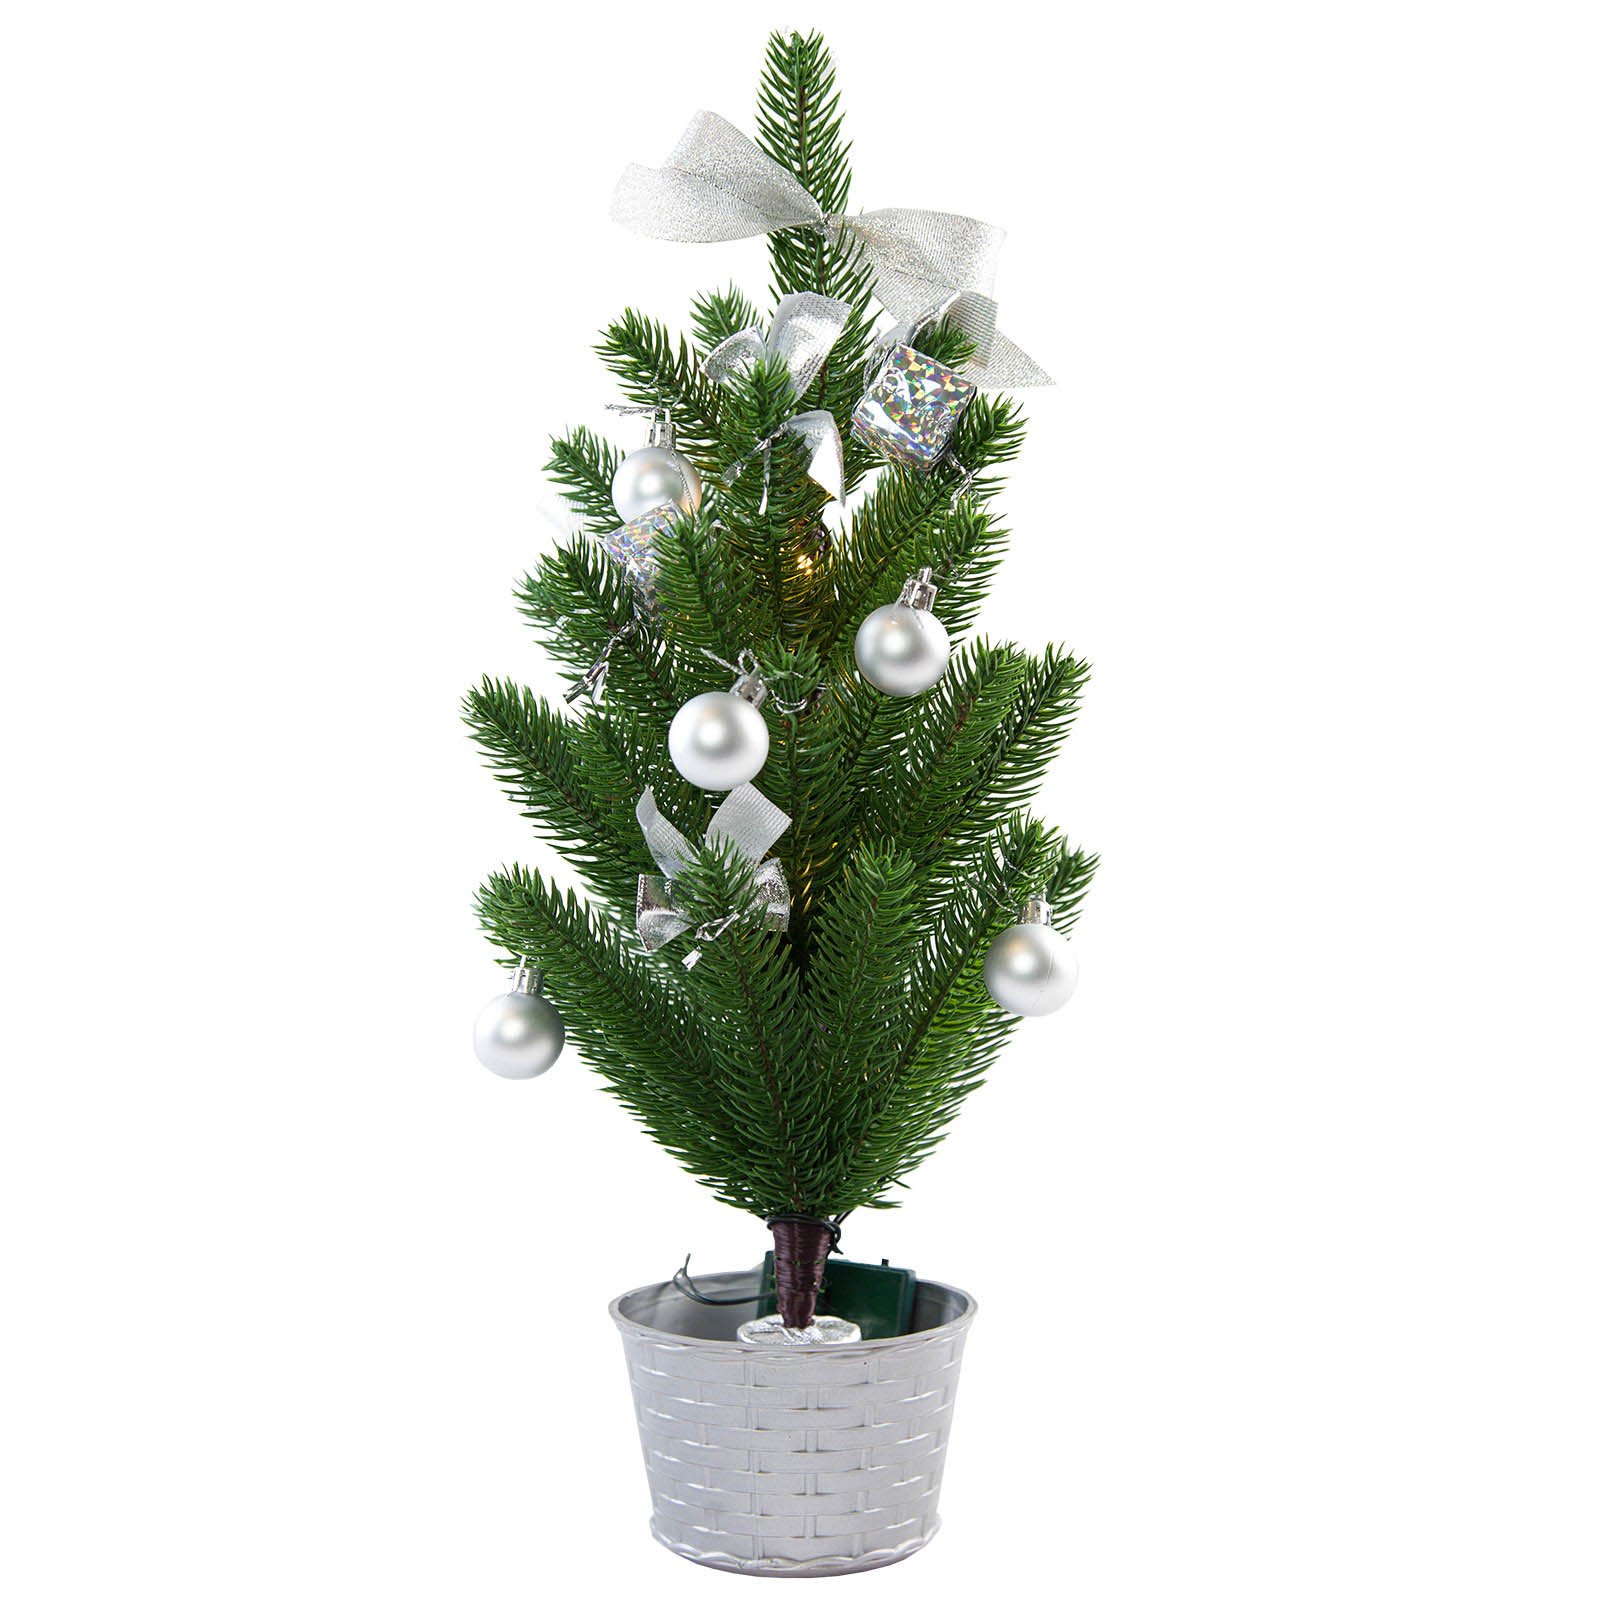 LED Christmas tree with decoration in silver